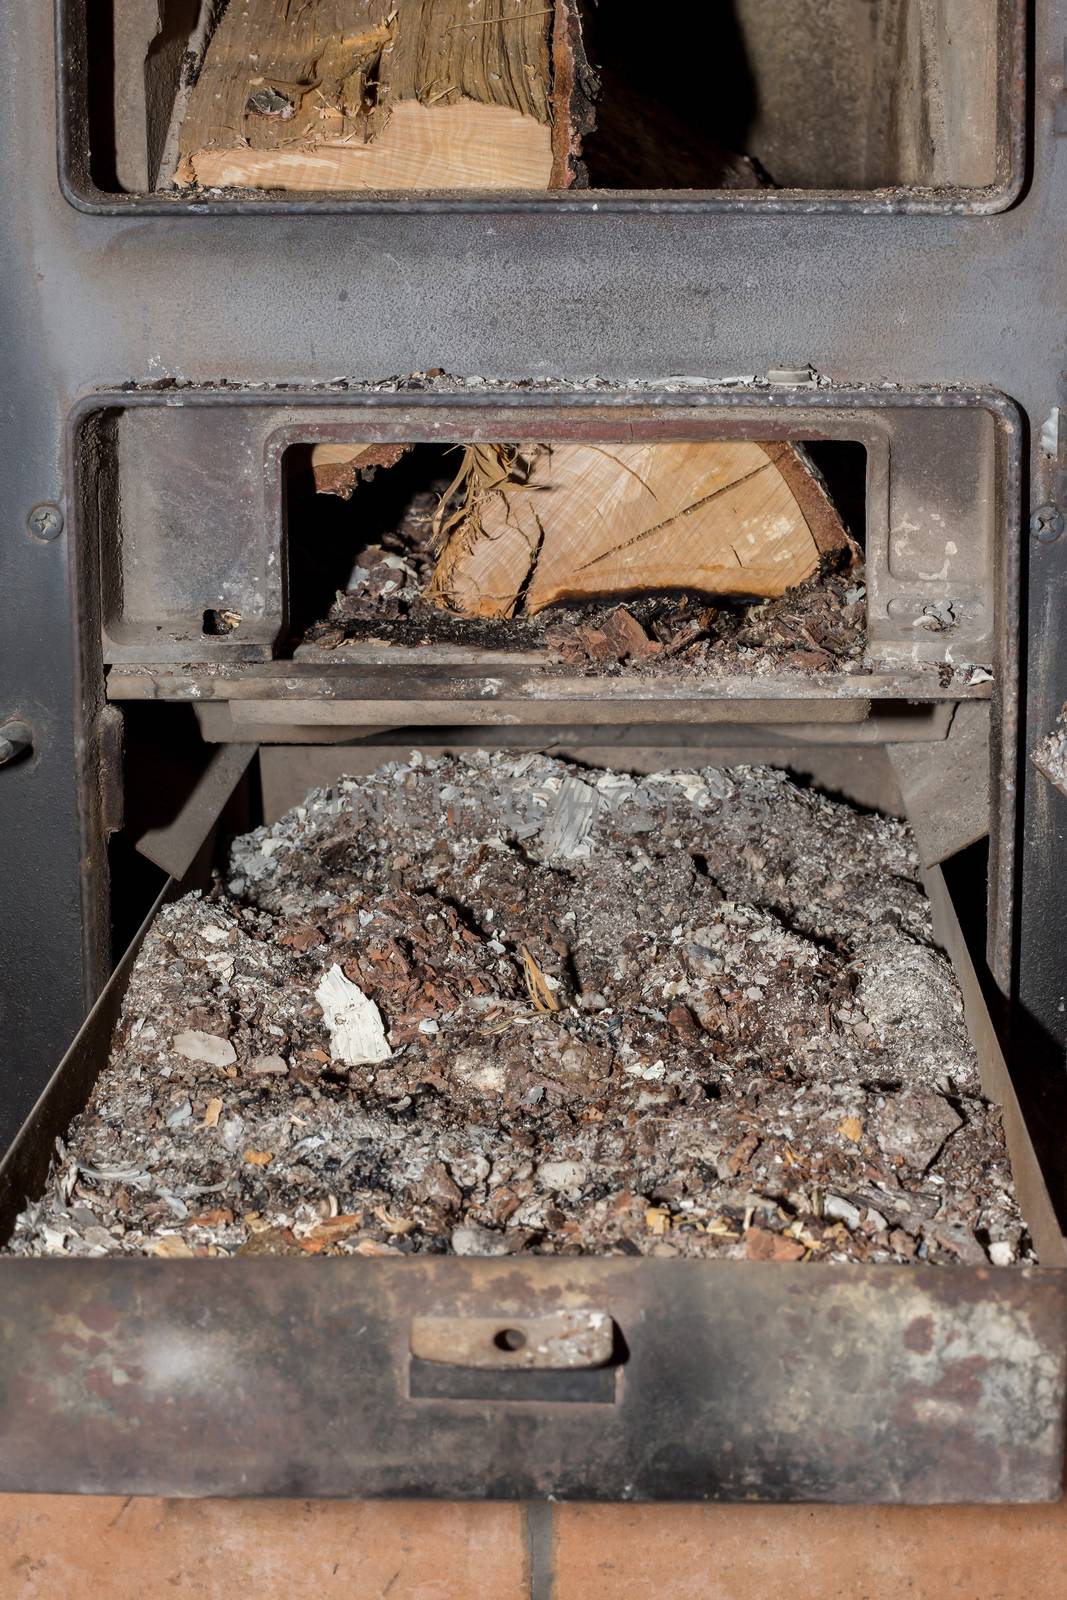 A box full of ashes under the fireplace by sandra_fotodesign